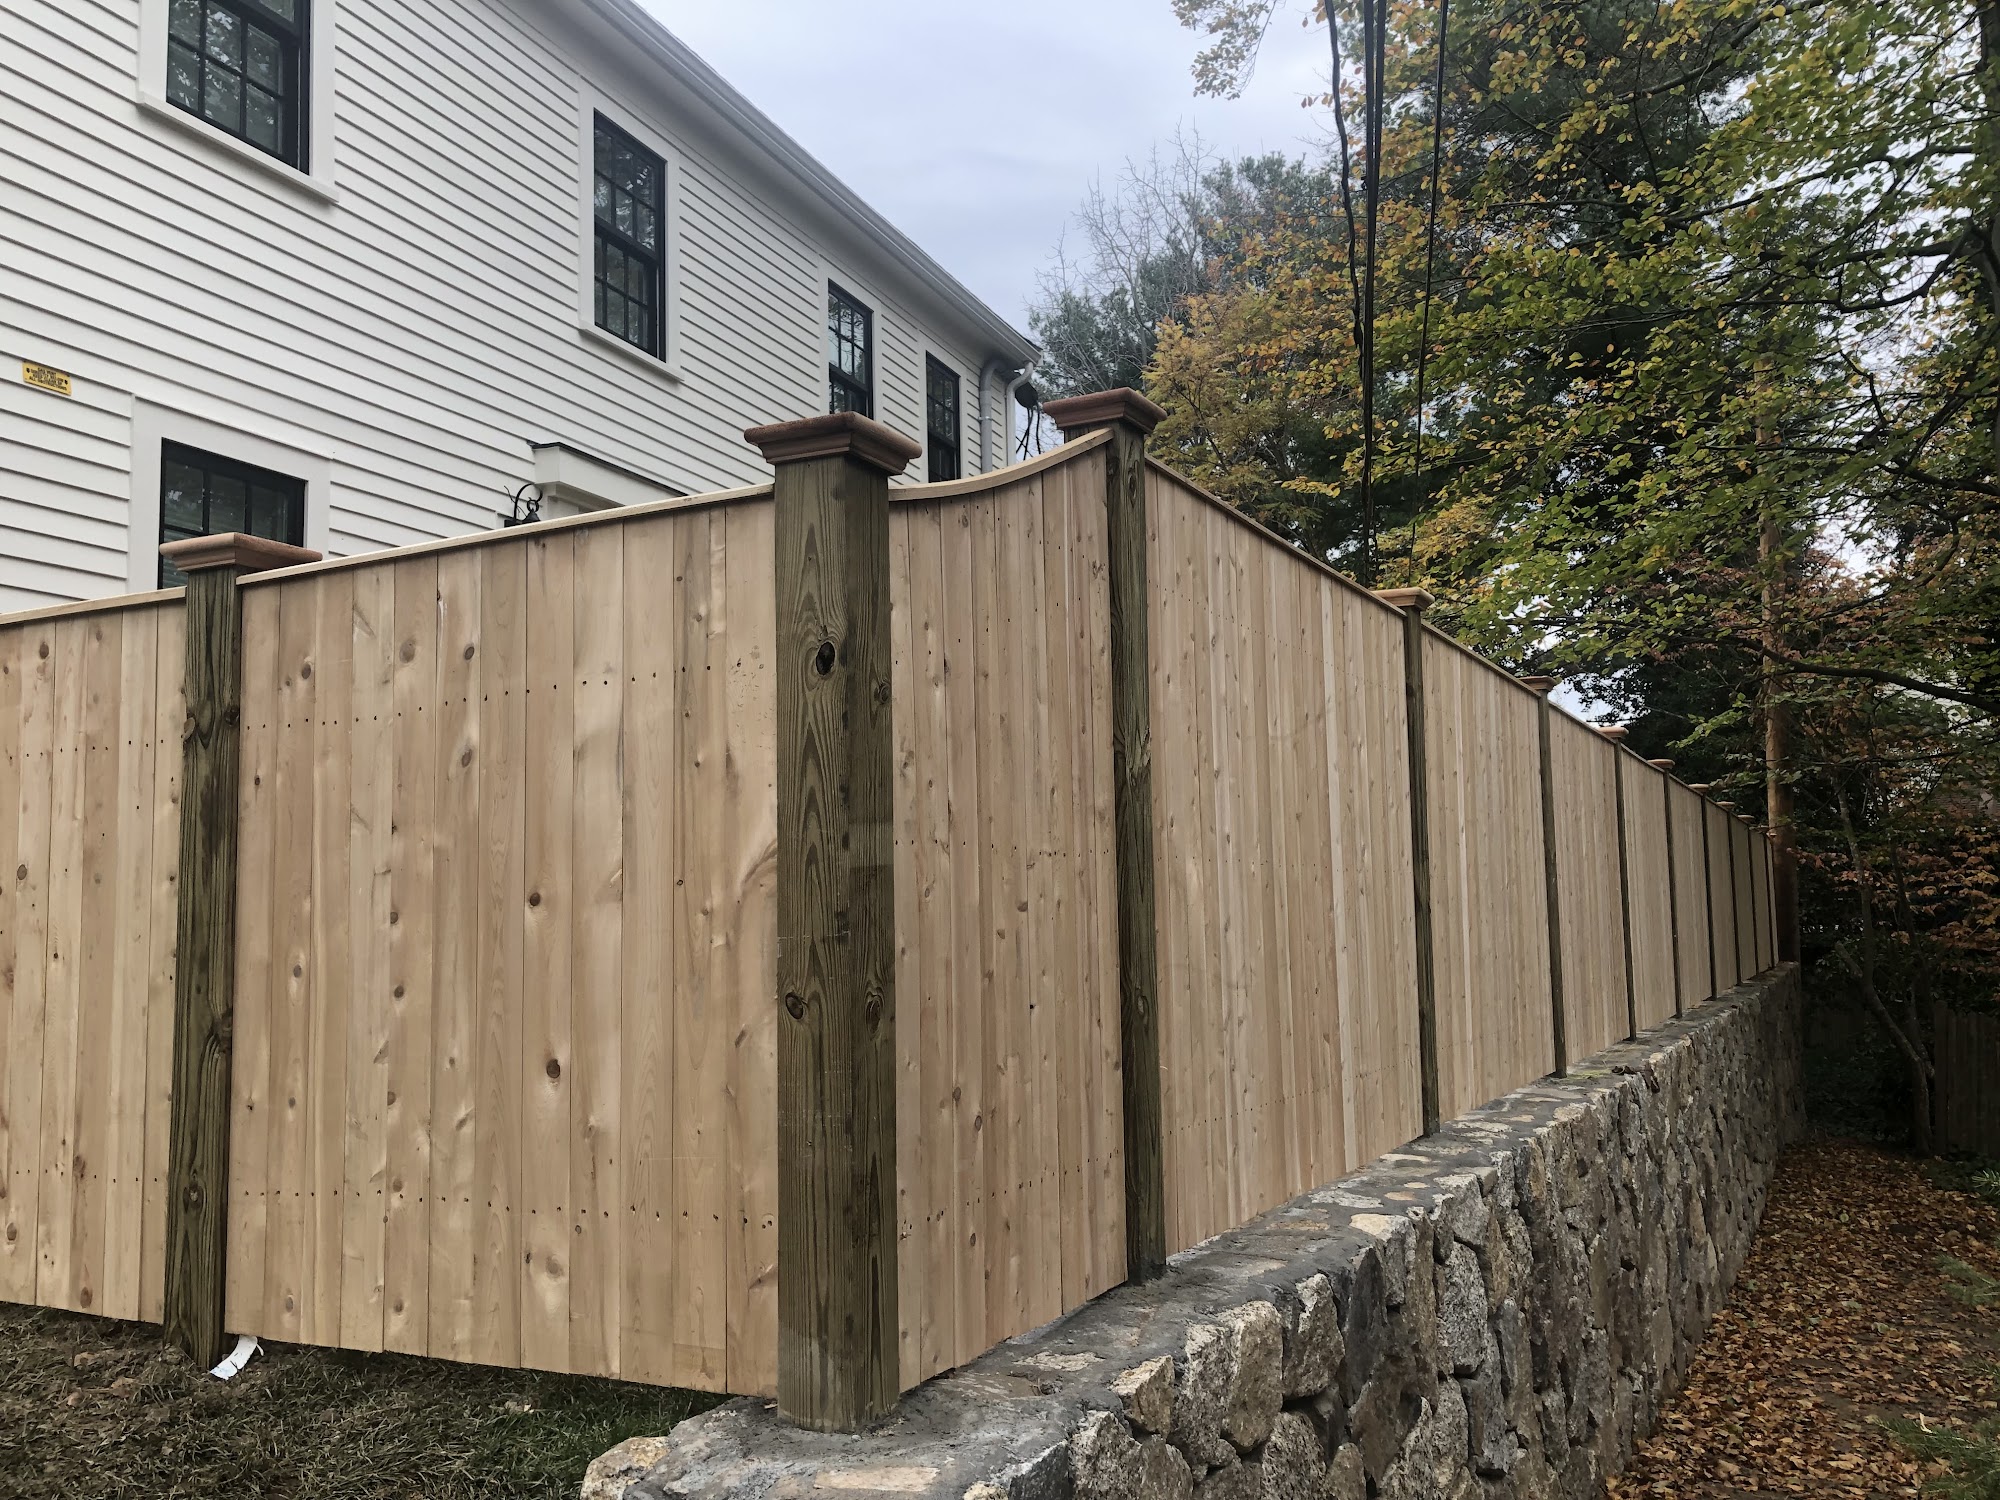 New England Fences - Fence Contractor | Aluminum/Wood/Metal Fencing in Clinton MA 355 Turnpike Rd, Southborough Massachusetts 01772